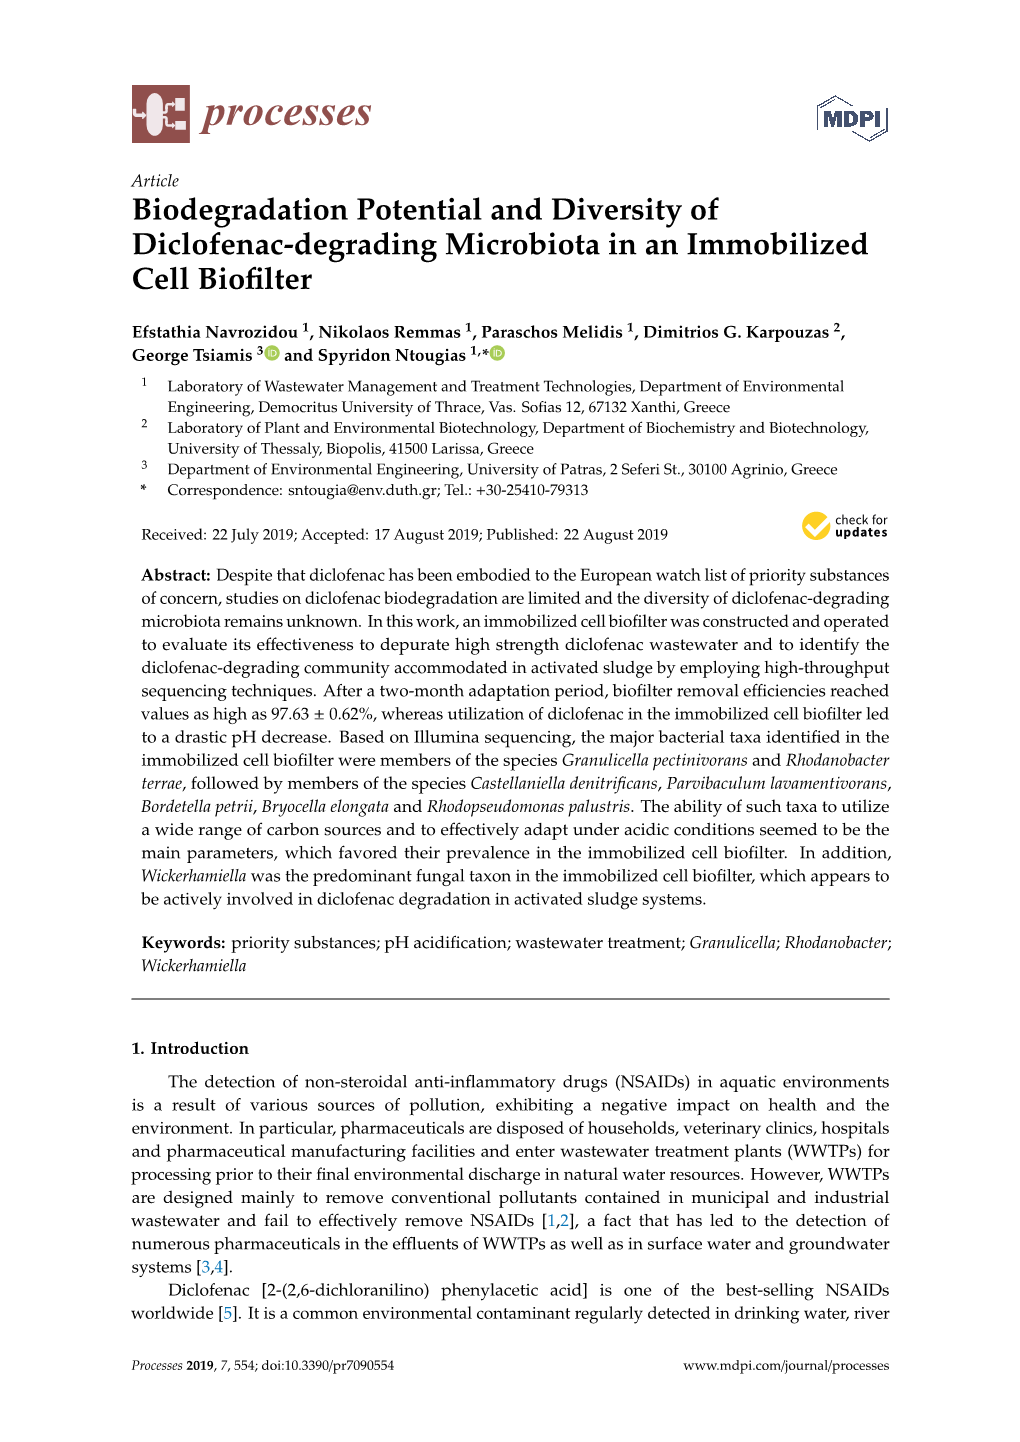 Biodegradation Potential and Diversity of Diclofenac-Degrading Microbiota in an Immobilized Cell Bioﬁlter